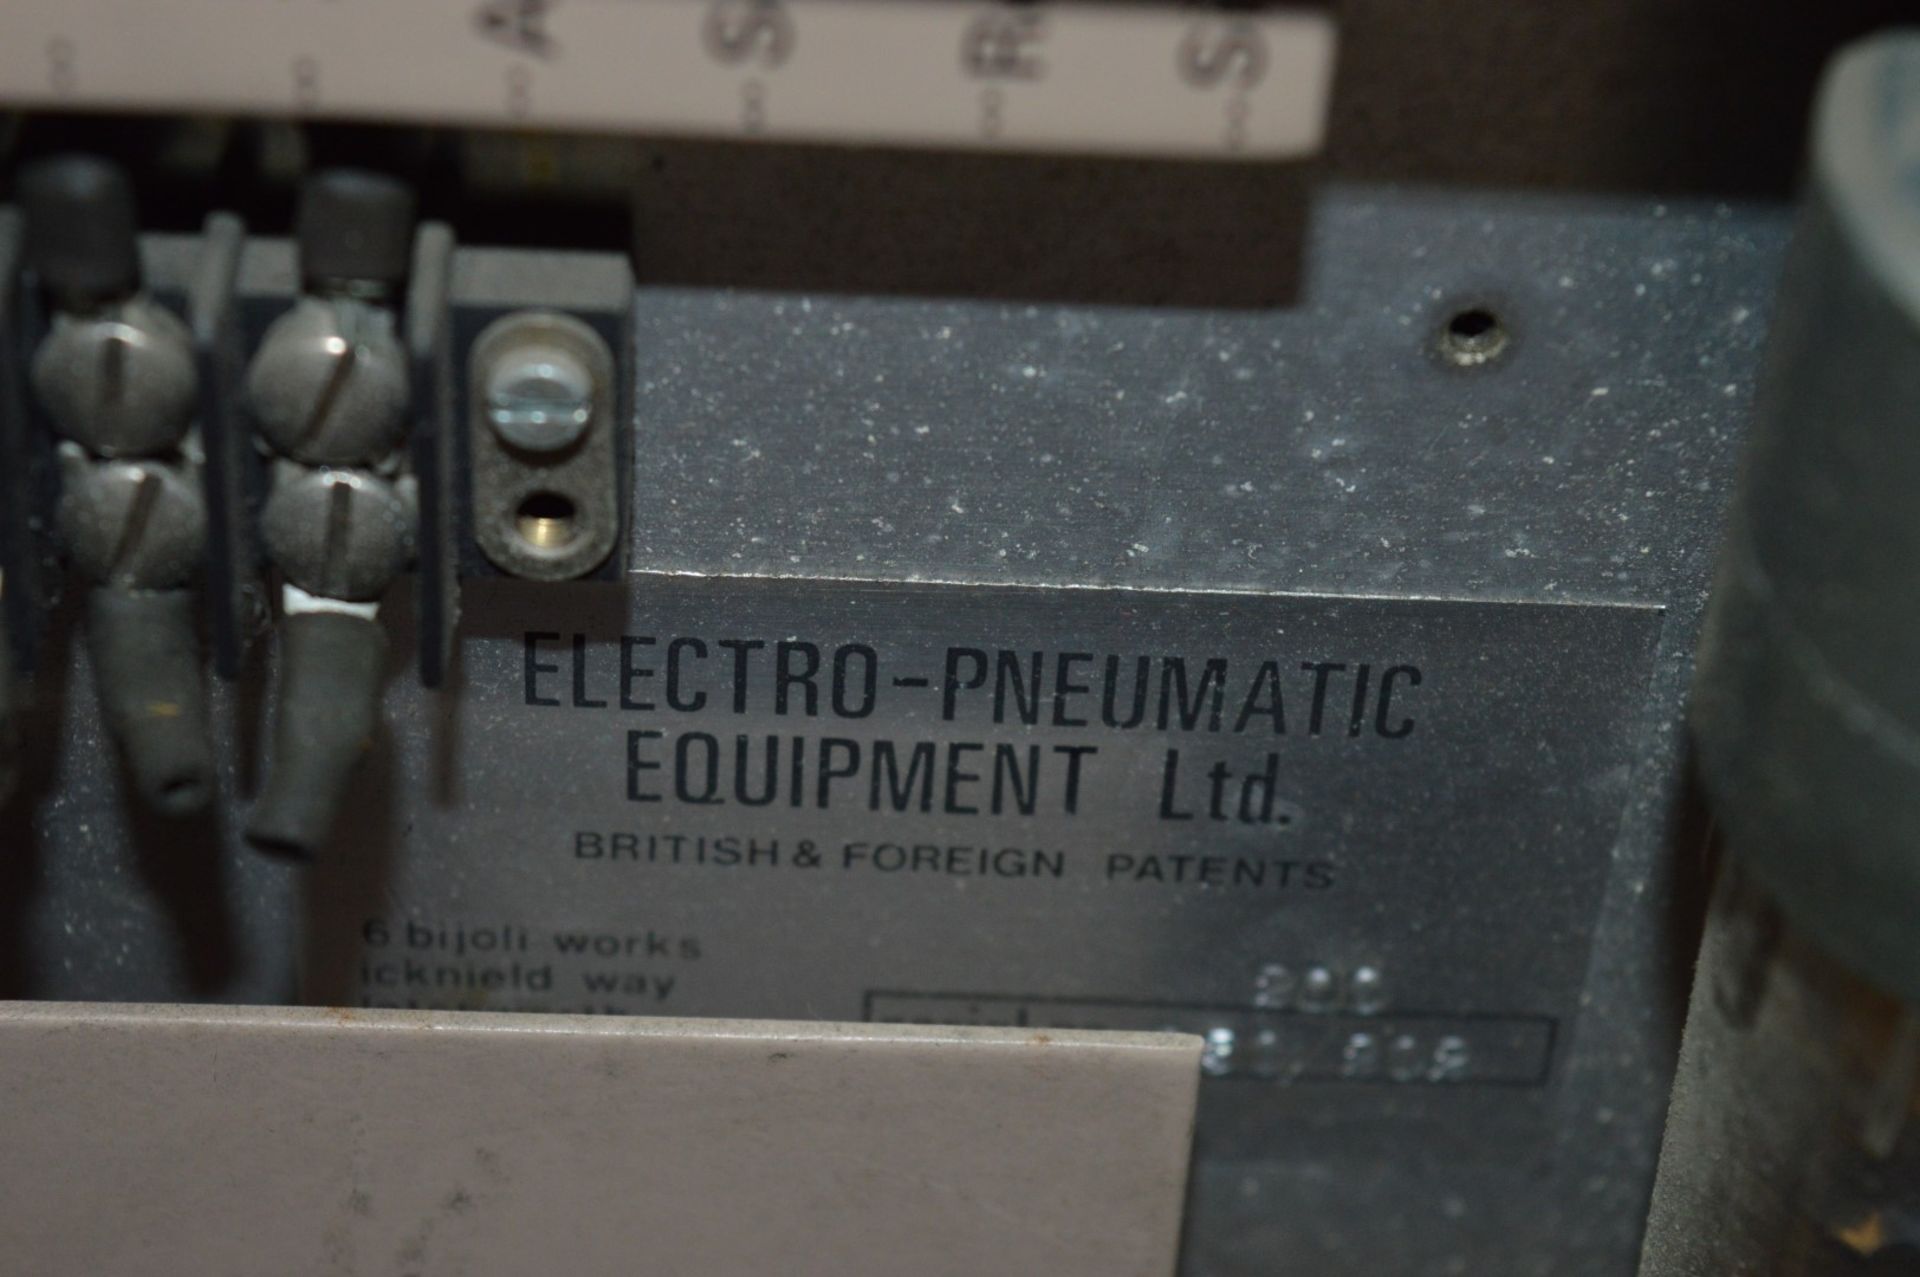 1 x Epetron 200 Mk2 Electro Pneumatic Tester - Vintage Test Equipment - CL011 - Ref J611 - Location: - Image 3 of 8